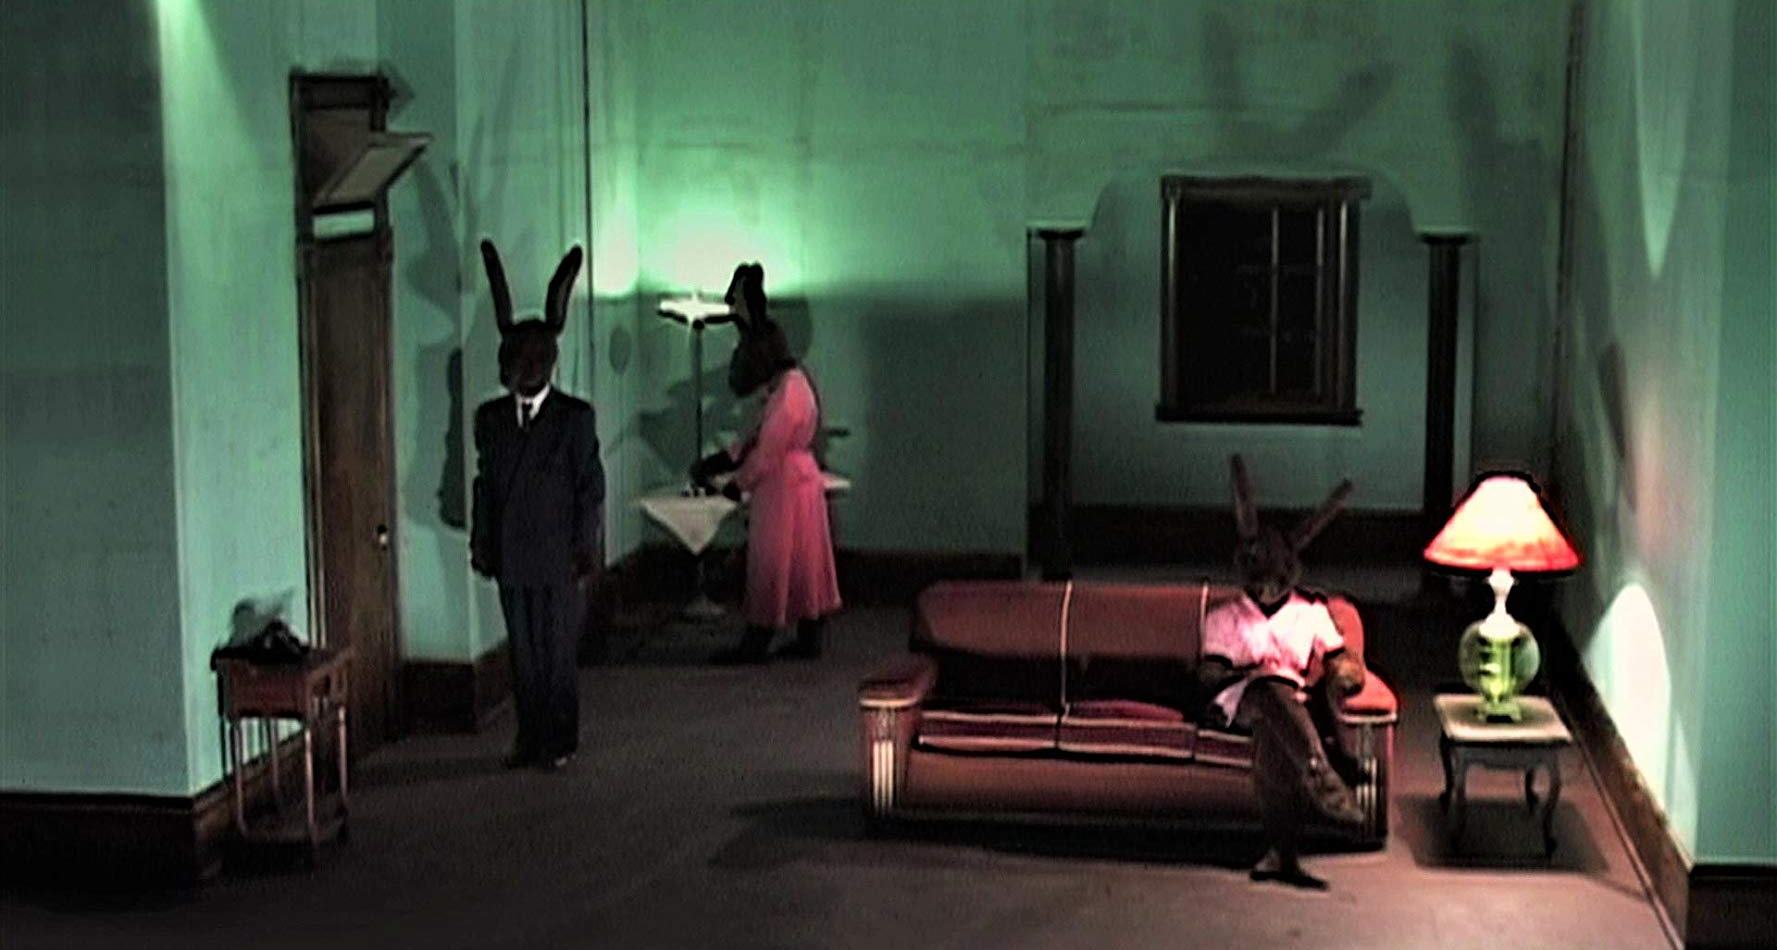 The suburban lives of rabbits in Inland Empire (2006). (With Naomi Watts and and Laura Elena Harring from Mulholland Dr, under the masks)